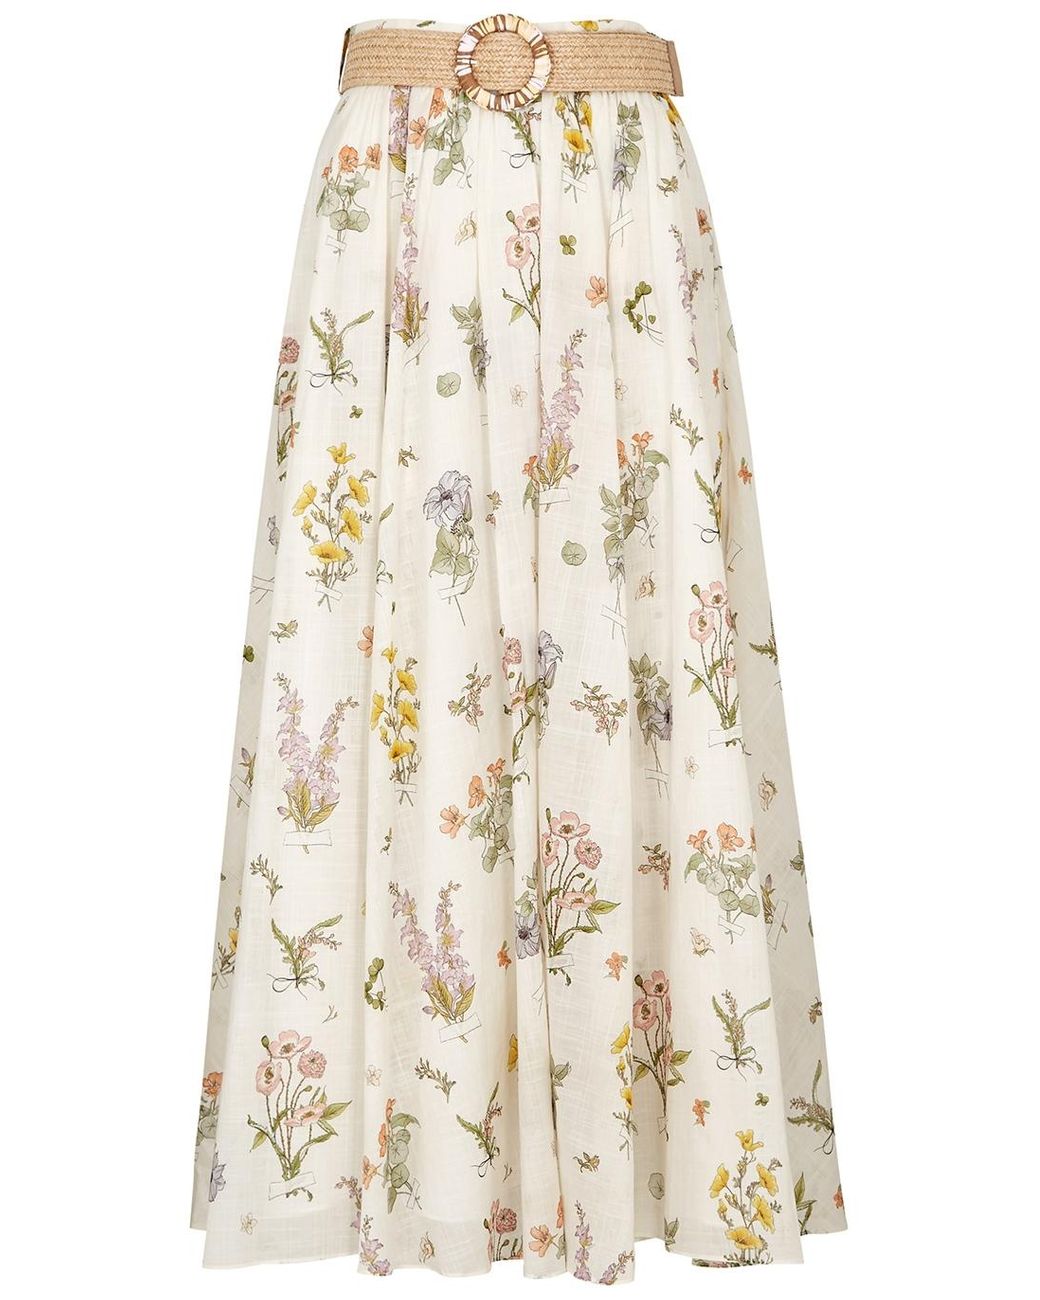 Zimmermann Jeannie Floral-print Cotton Maxi Skirt in Natural | Lyst UK